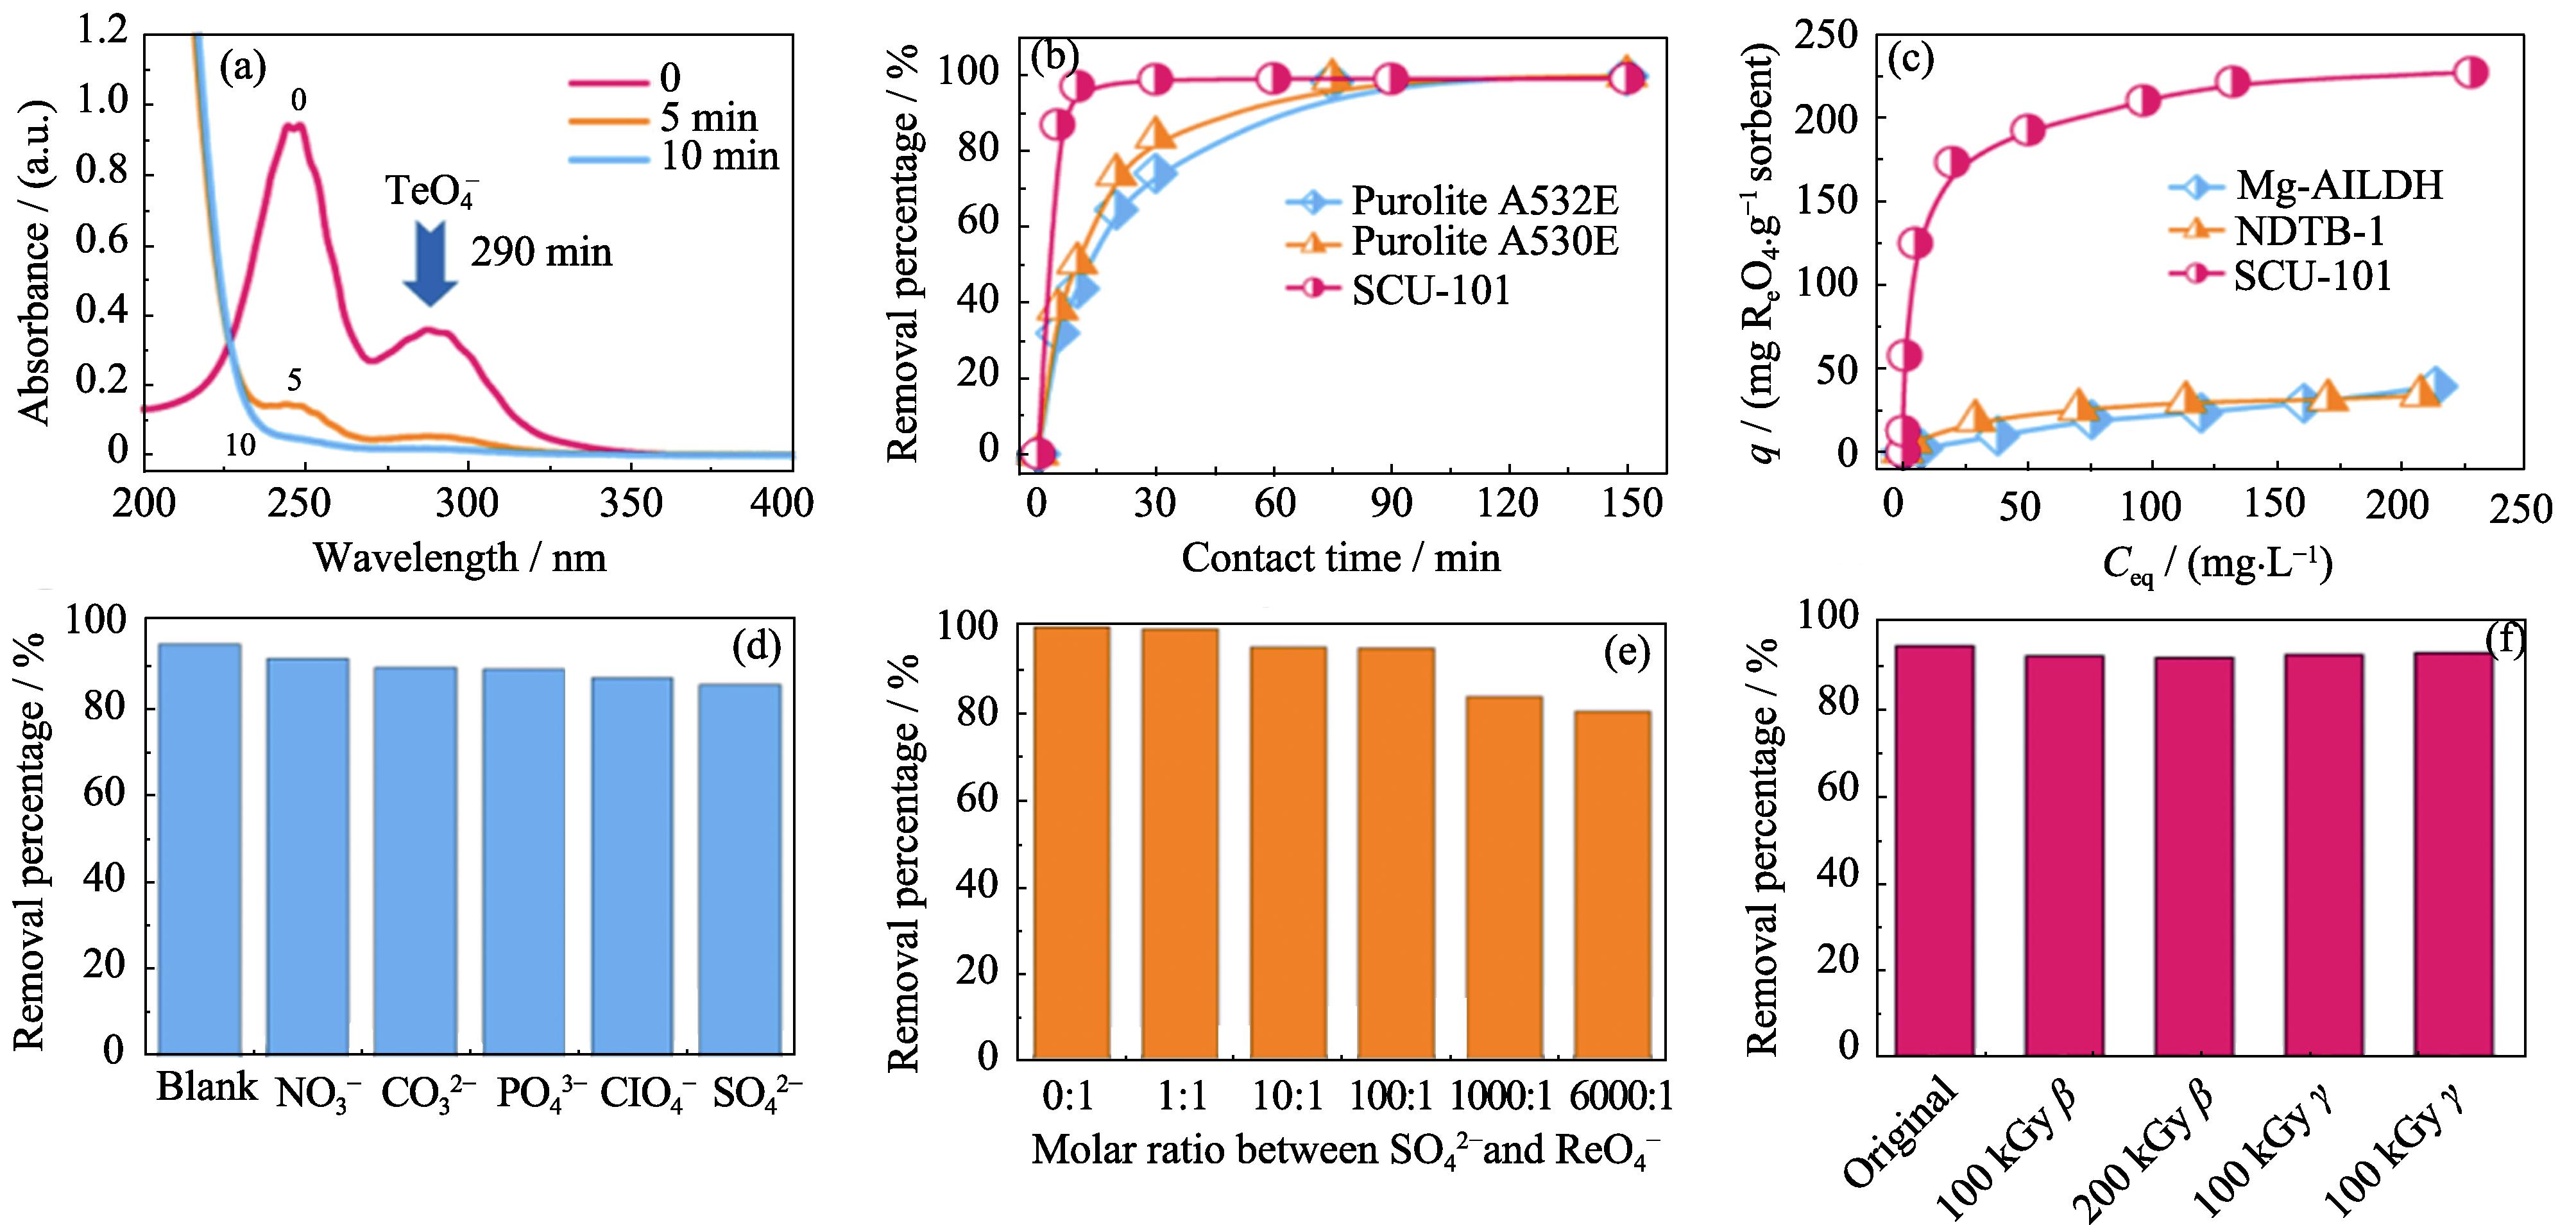 (a) UV-Vis absorption spectra of TcO4- during the anion exchange; (b) Sorption kinetics of TcO4- by SCU-101 compared with Purolite A530E and A532E; (c) Sorption isotherms of ReO4- by SCU-101, Mg-Al-LDH, and NDTB-1; (d) Effect of competing anions on the removal percentage of TcO4- by SCU-101; (e) Effect of SO42- on the anion exchange of ReO4- by SCU-101; (f) Removal percentage of ReO4- after irradiation as compared with the original SCU-101 sample[28]